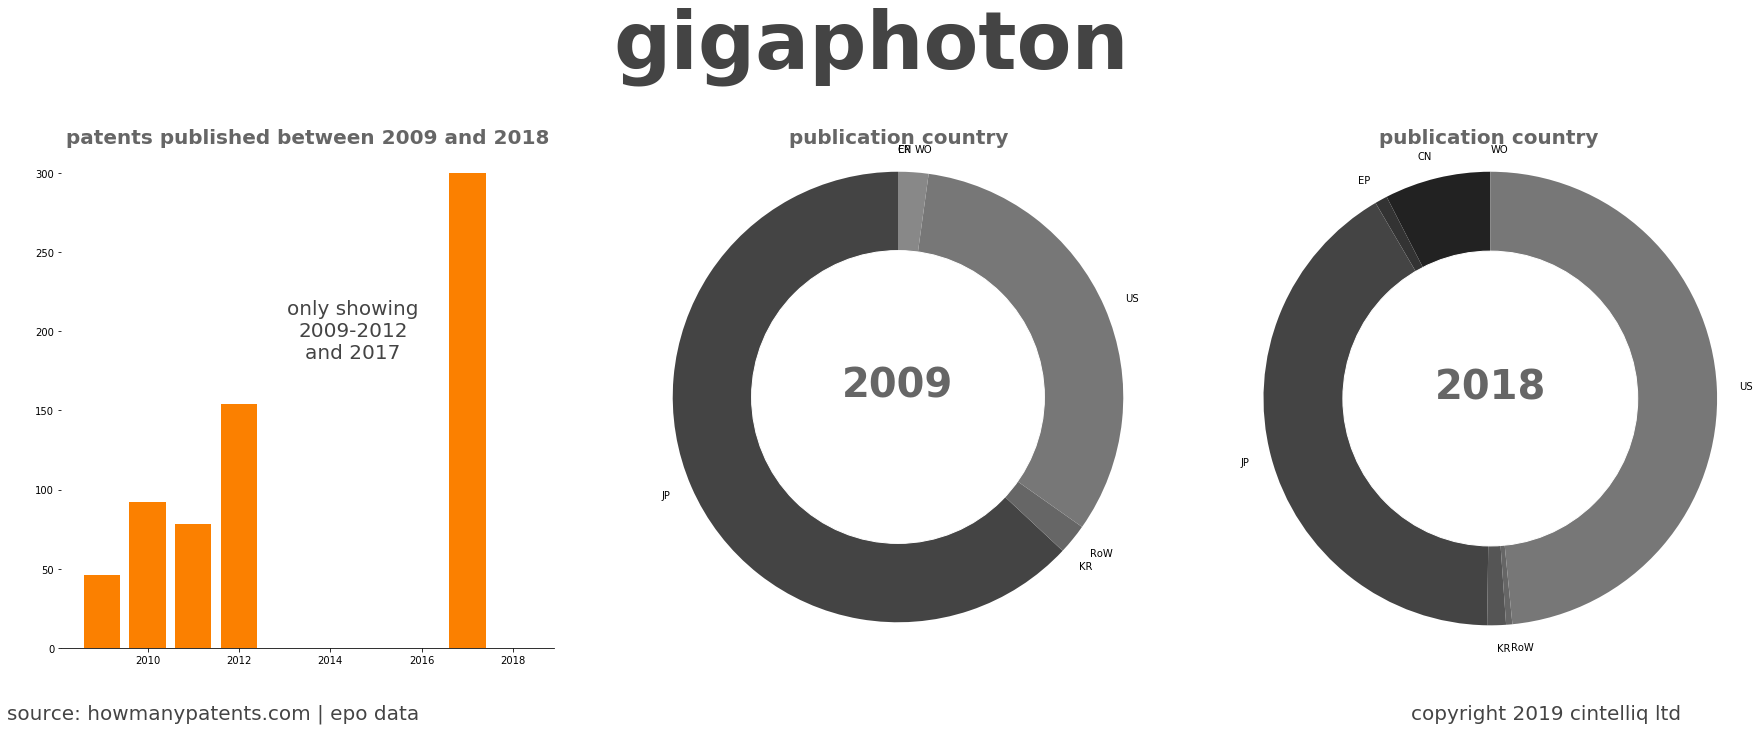 summary of patents for Gigaphoton